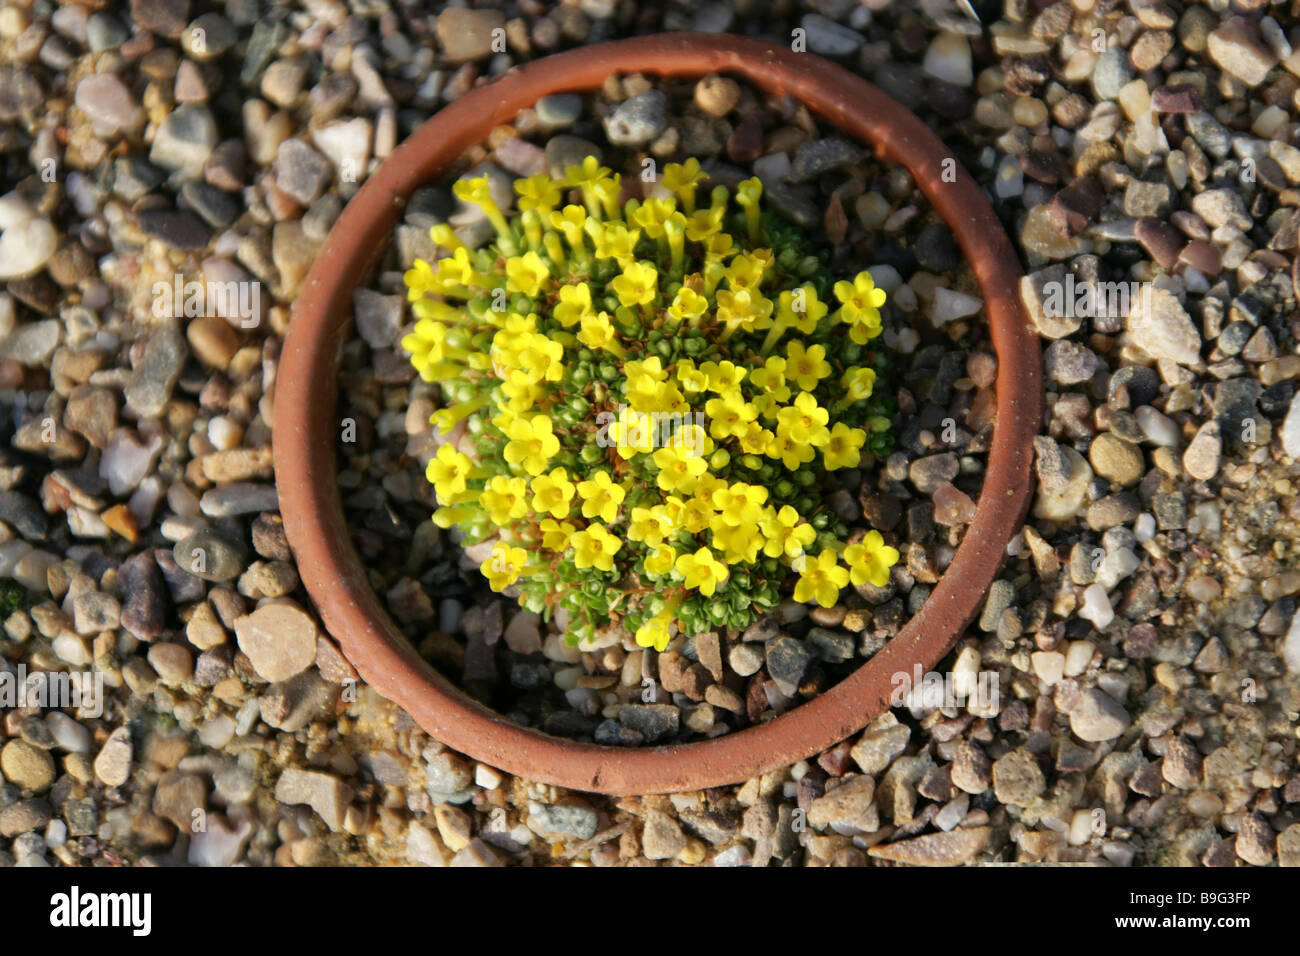 Dionysia tapetodes, Primulaceae, Central and West Asia, Pakistan Stock Photo